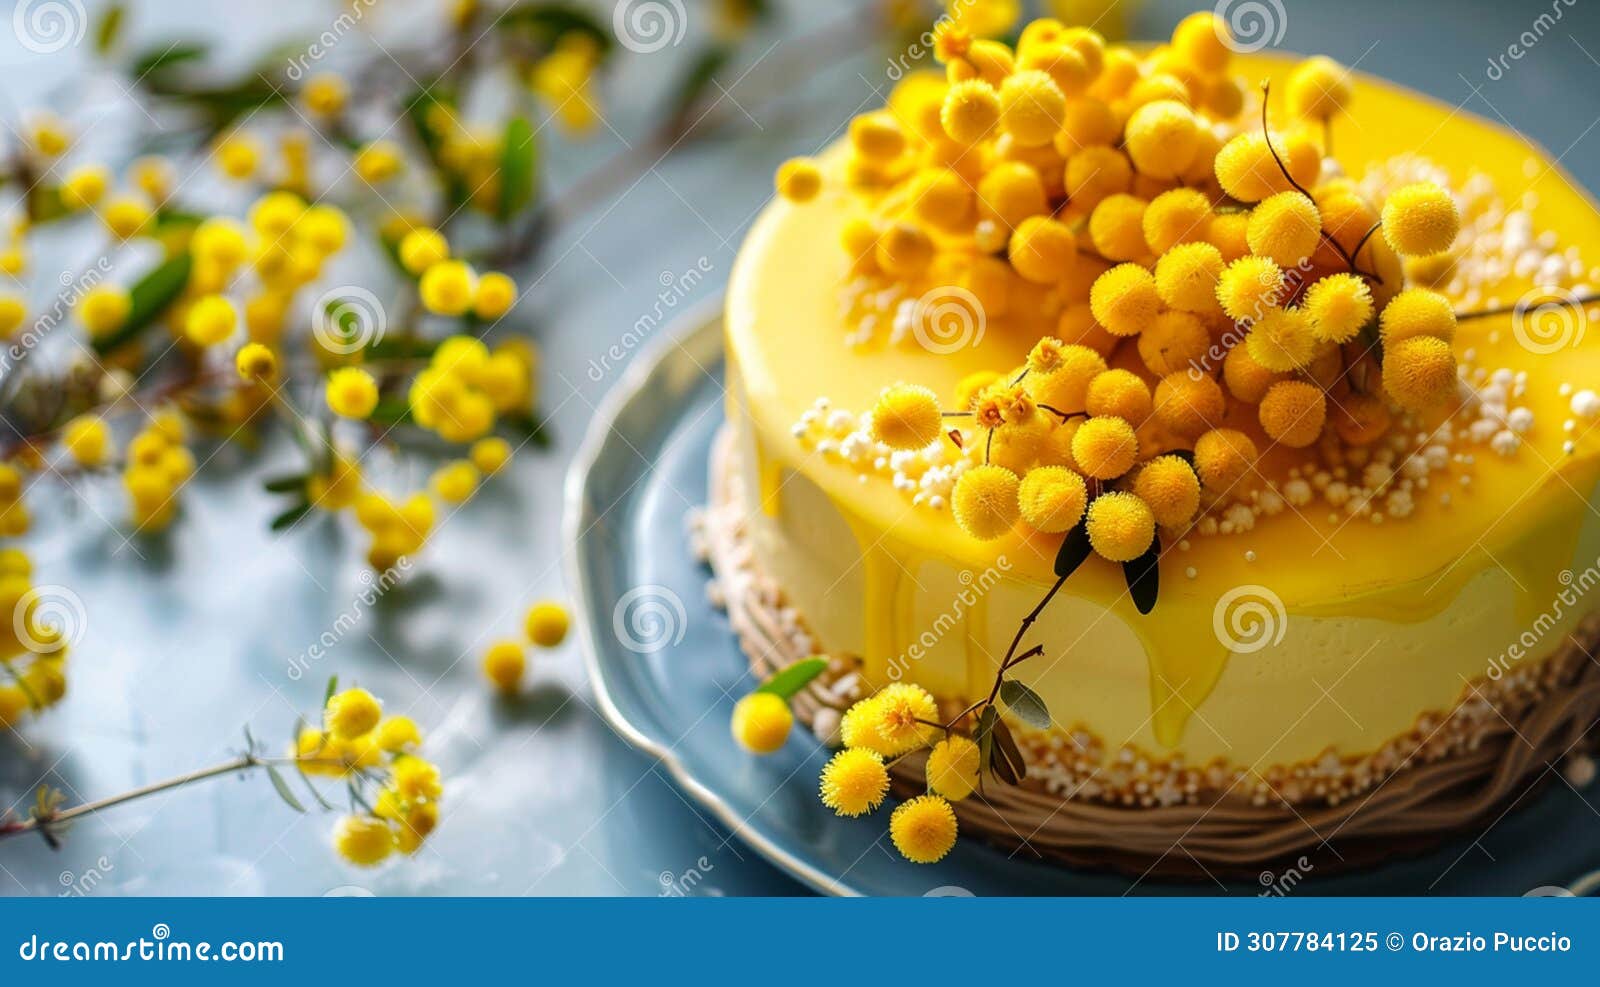 sweet elegance: mimosa cake for women's day, union of taste and refinement